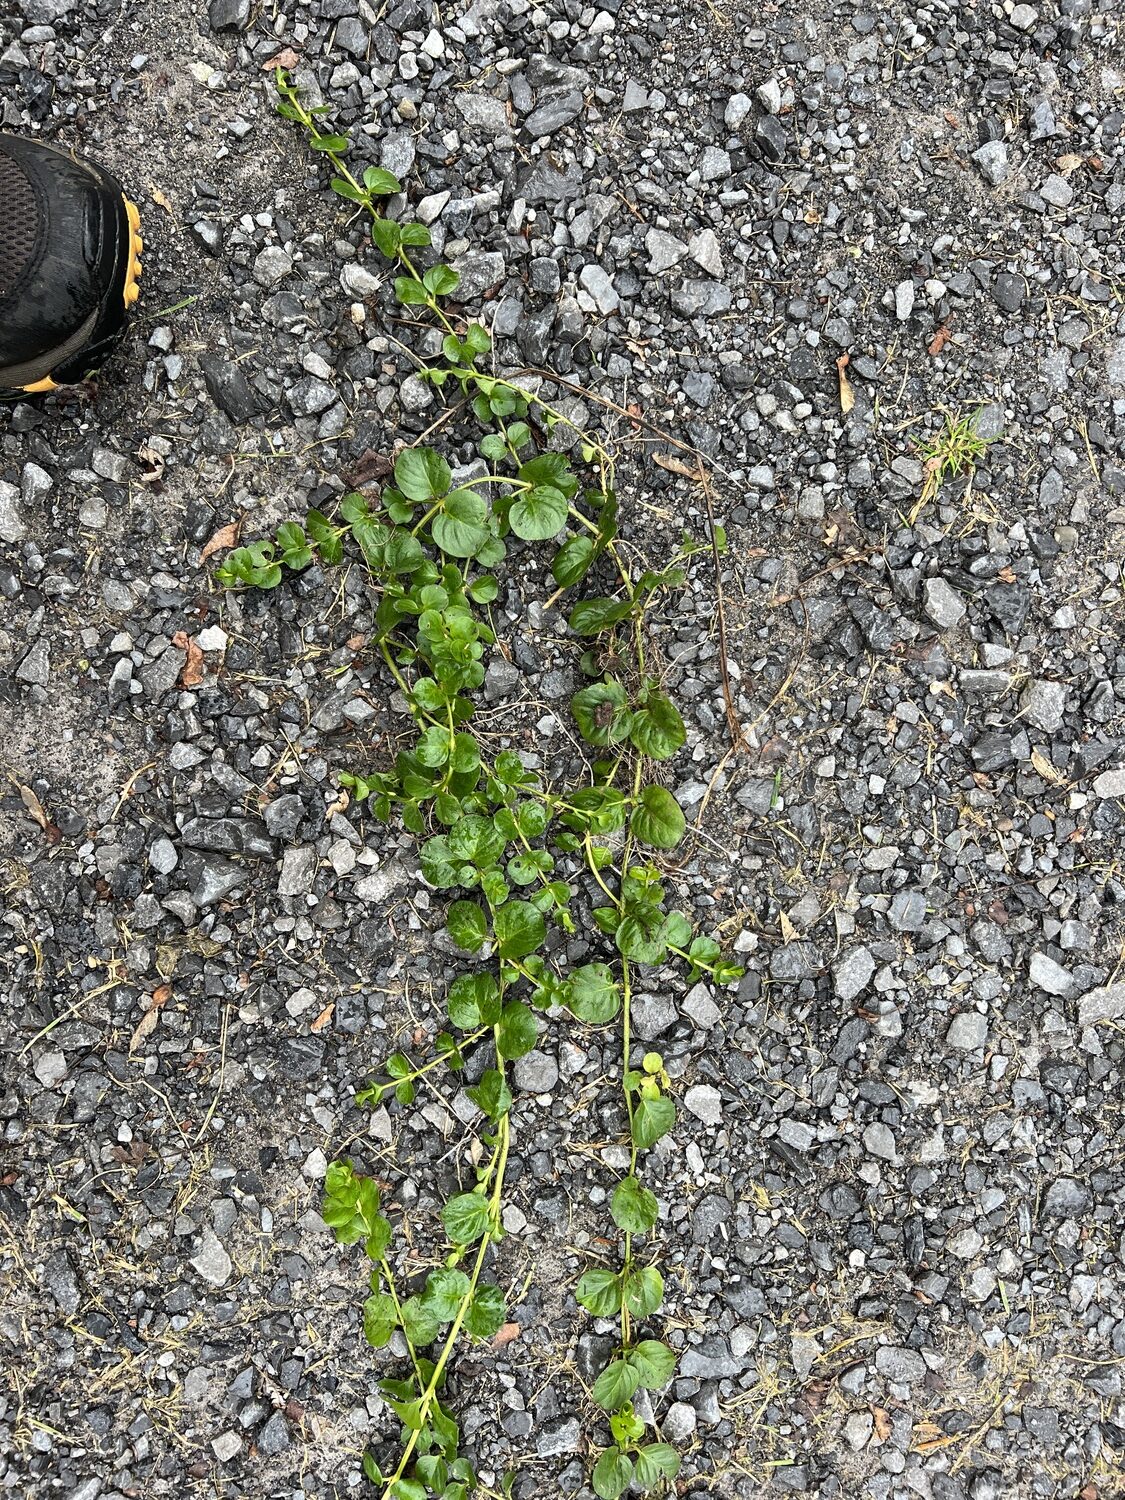 An entire creeping Jenny extricated from the garden. This single plant had multiple shoots or runners, and if you look at the right-most runner you can see where each leaf node had tiny white roots that attached to the soil. Just leave one of these rooted nodes behind and the weed has the beginnings of next year's wanderlust. This plant from last summer was about 2 feet long with over 10 tendrils.  ANDREW MESSINGER